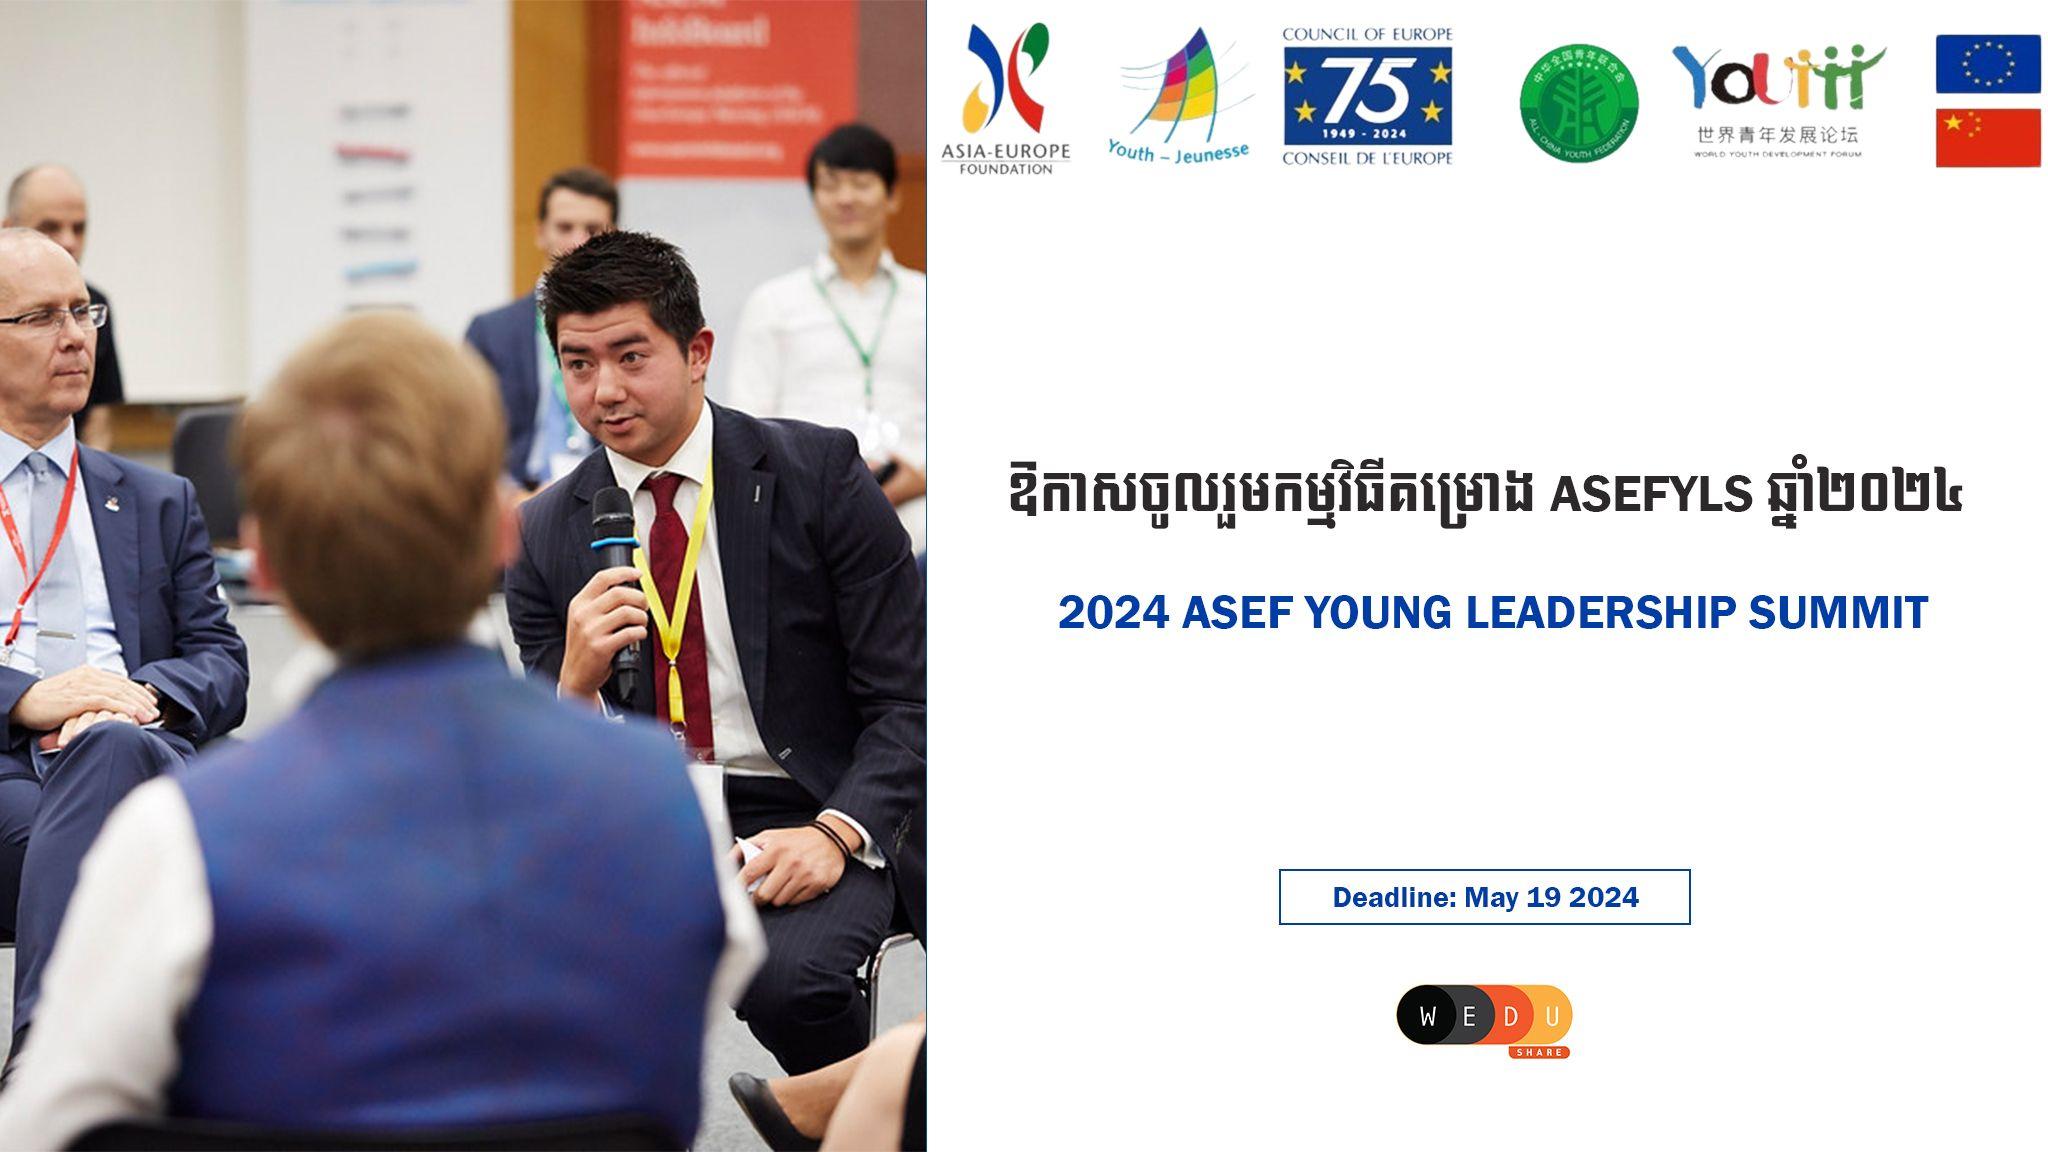 ASEF Young Leaders Summit 2024 in Hungary & China